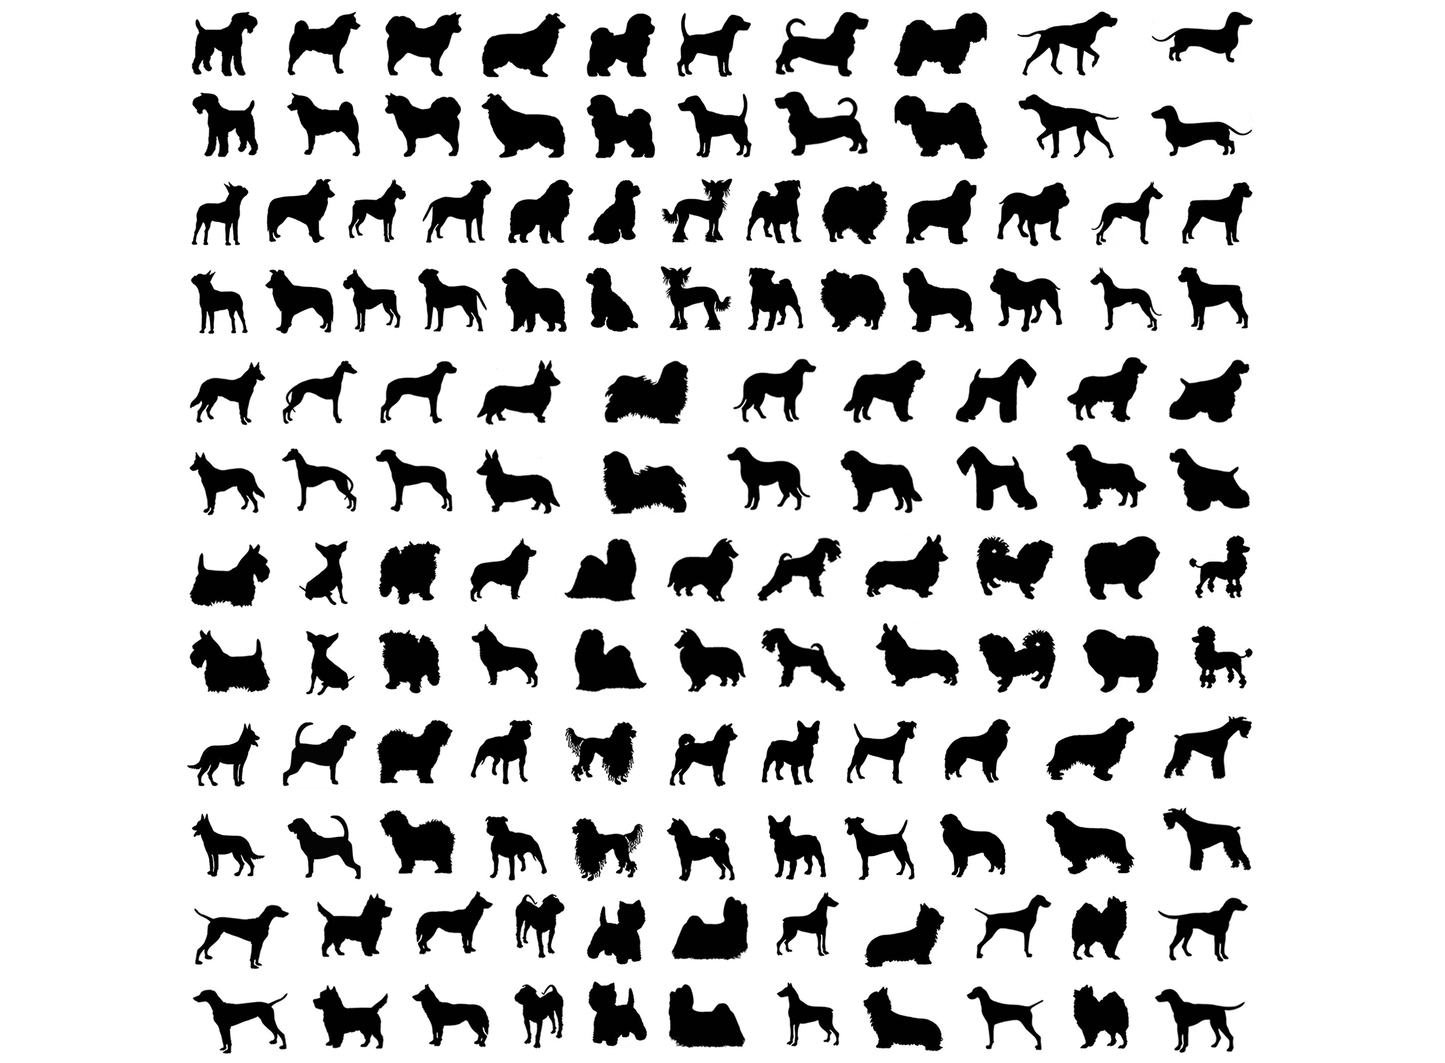 Dogs 132 pcs 7/16" Black Fused Glass Decals